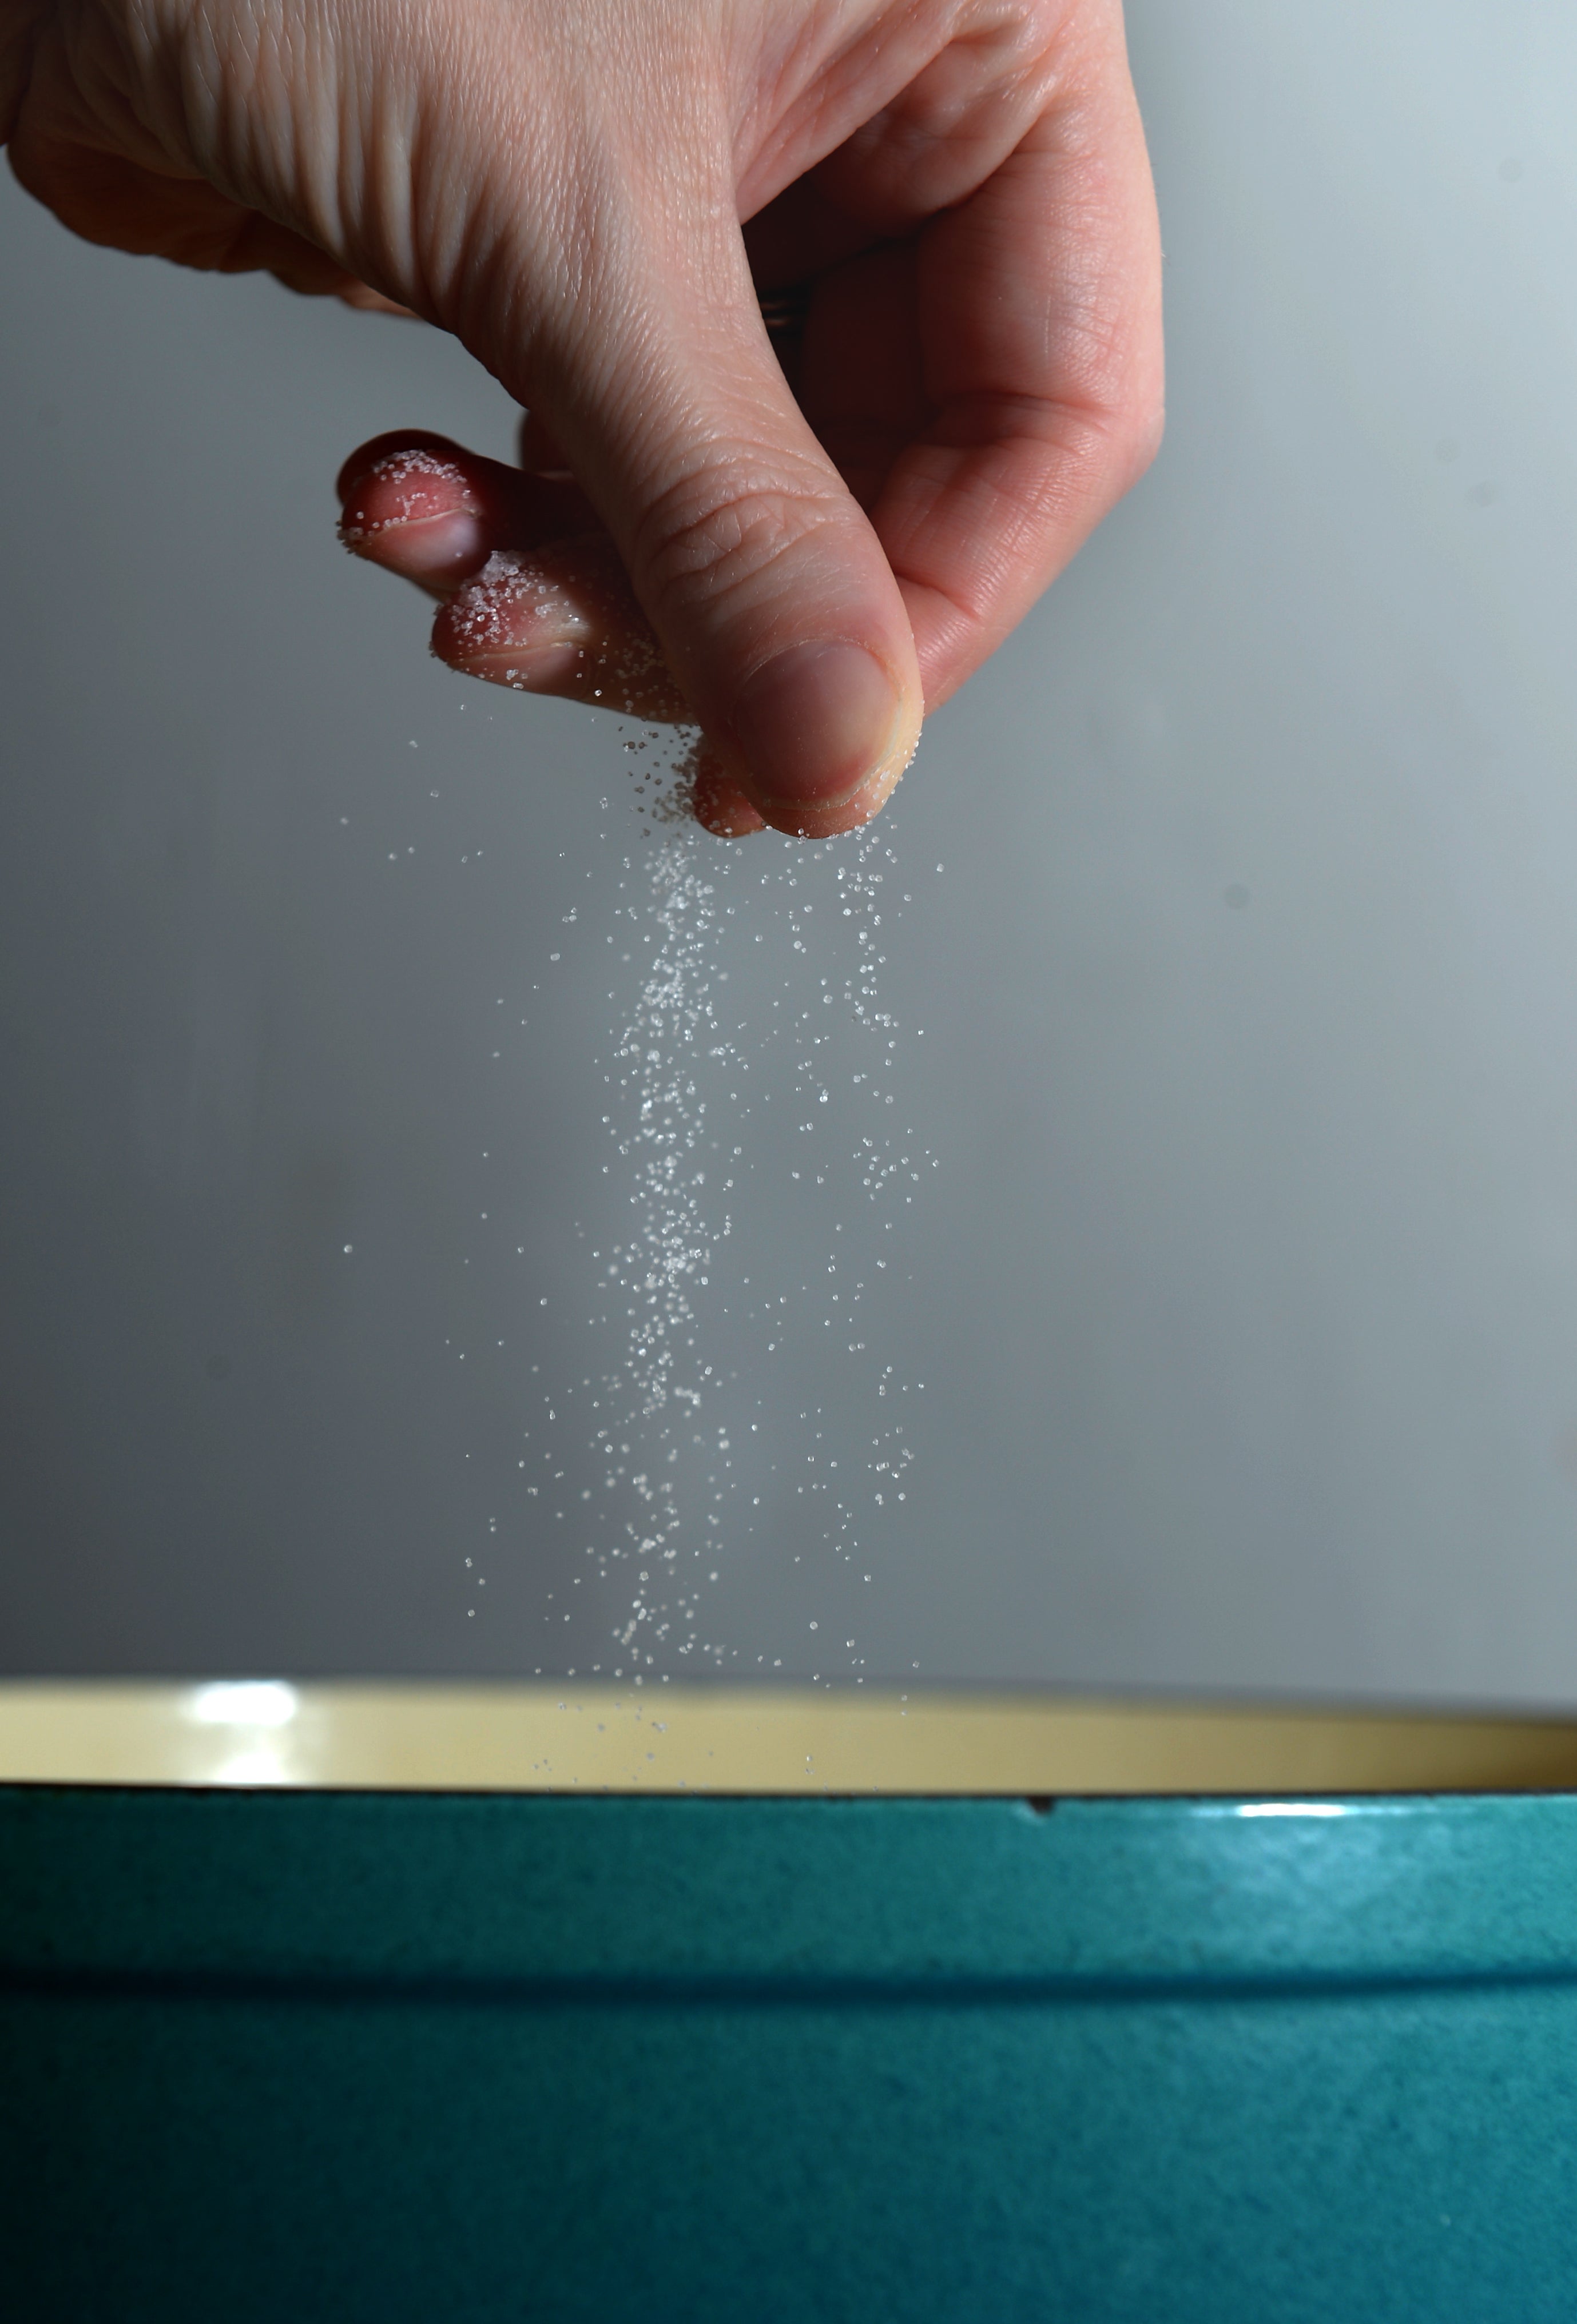 Restaurants have been asked to gradually reduce the amount of salt being added to their dishes (Anthony Devlin/PA)